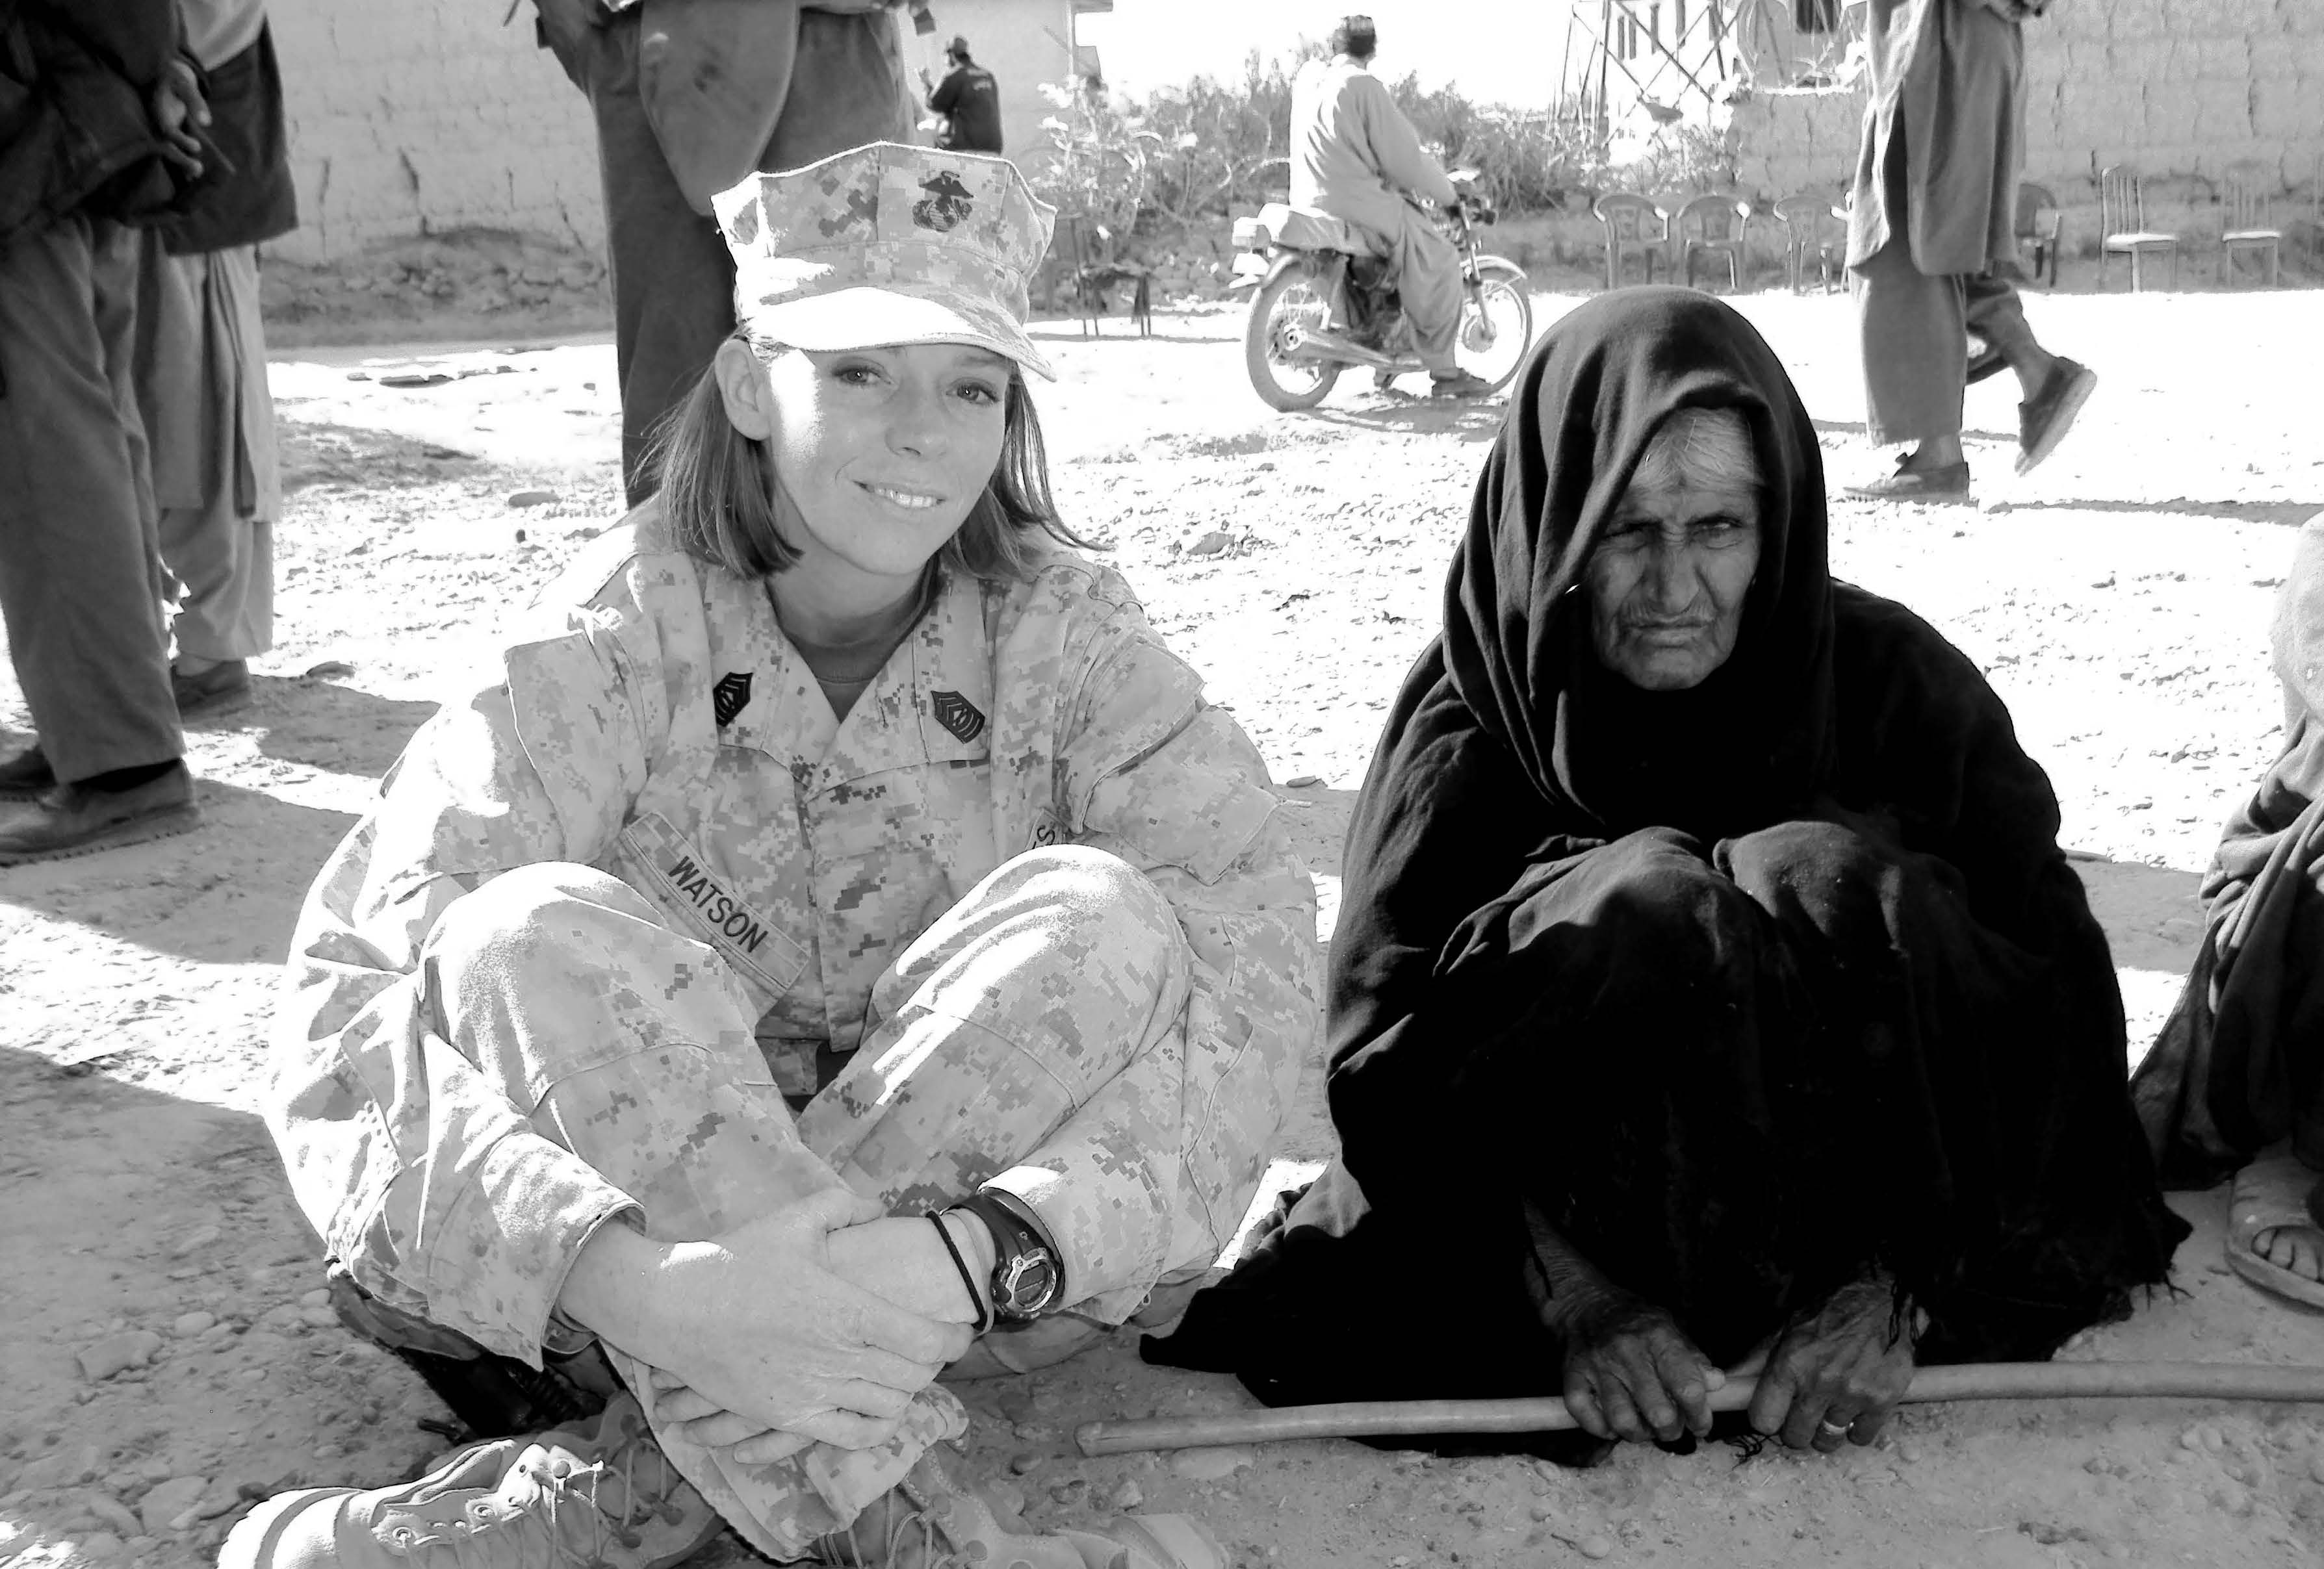 Marine Corps Master Sergeant Julia Watson, serving in Helmand Province, performing humanitarian service projects for the citizens of Afghanistan. Sister Watson and others completed an irrigation canal project for the Afghan woman sitting next to her. Courtesy of Eugene J. Wikle.